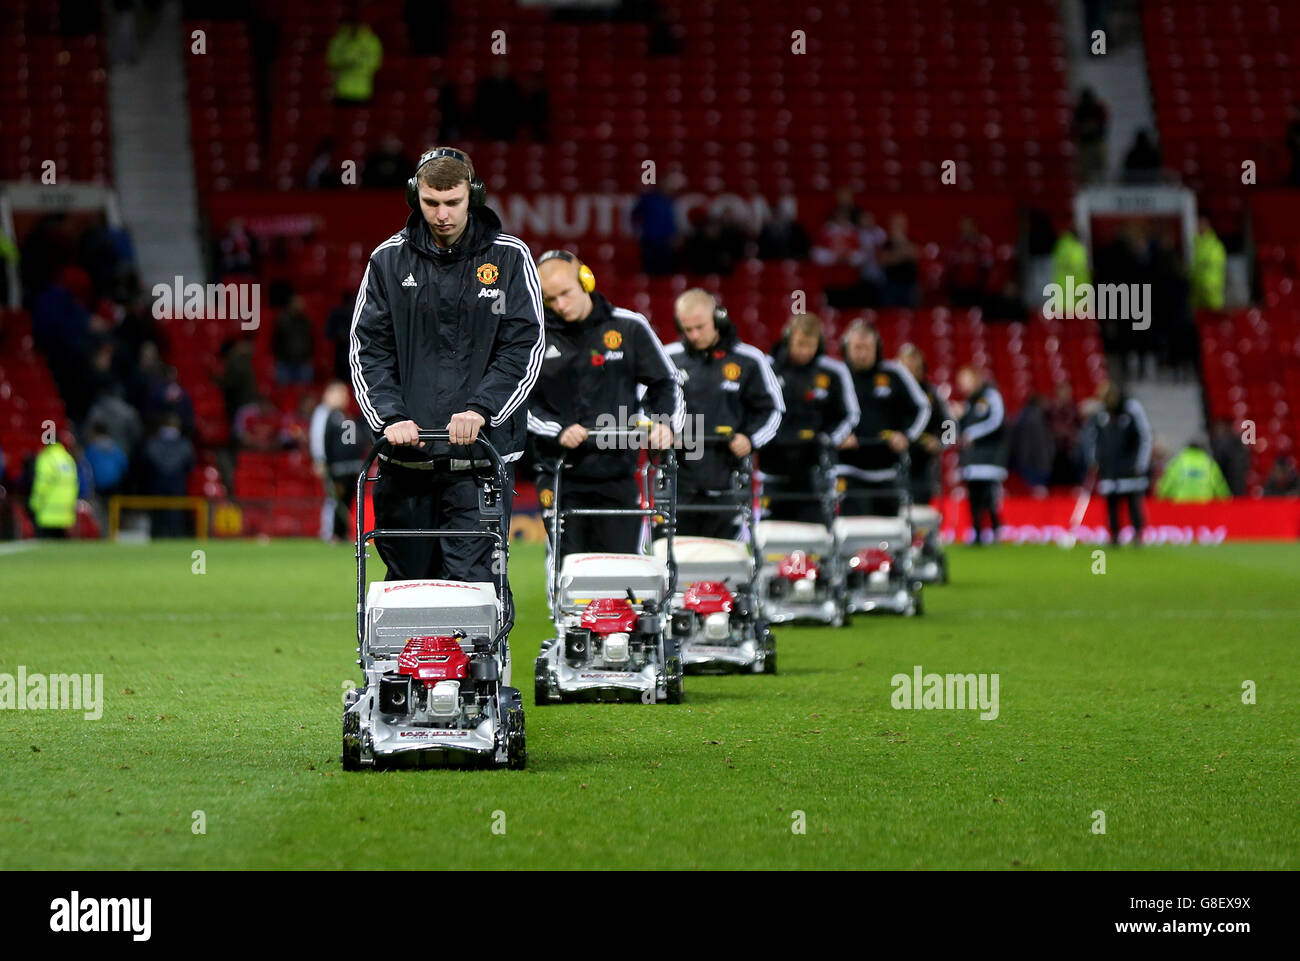 Soccer - Barclays Premier League - Manchester United v West Bromwich Albion - Old Trafford. Groundsmen with lawnmowers cut the grass and clear the sods of turf from the pitch surface after the game. Stock Photo